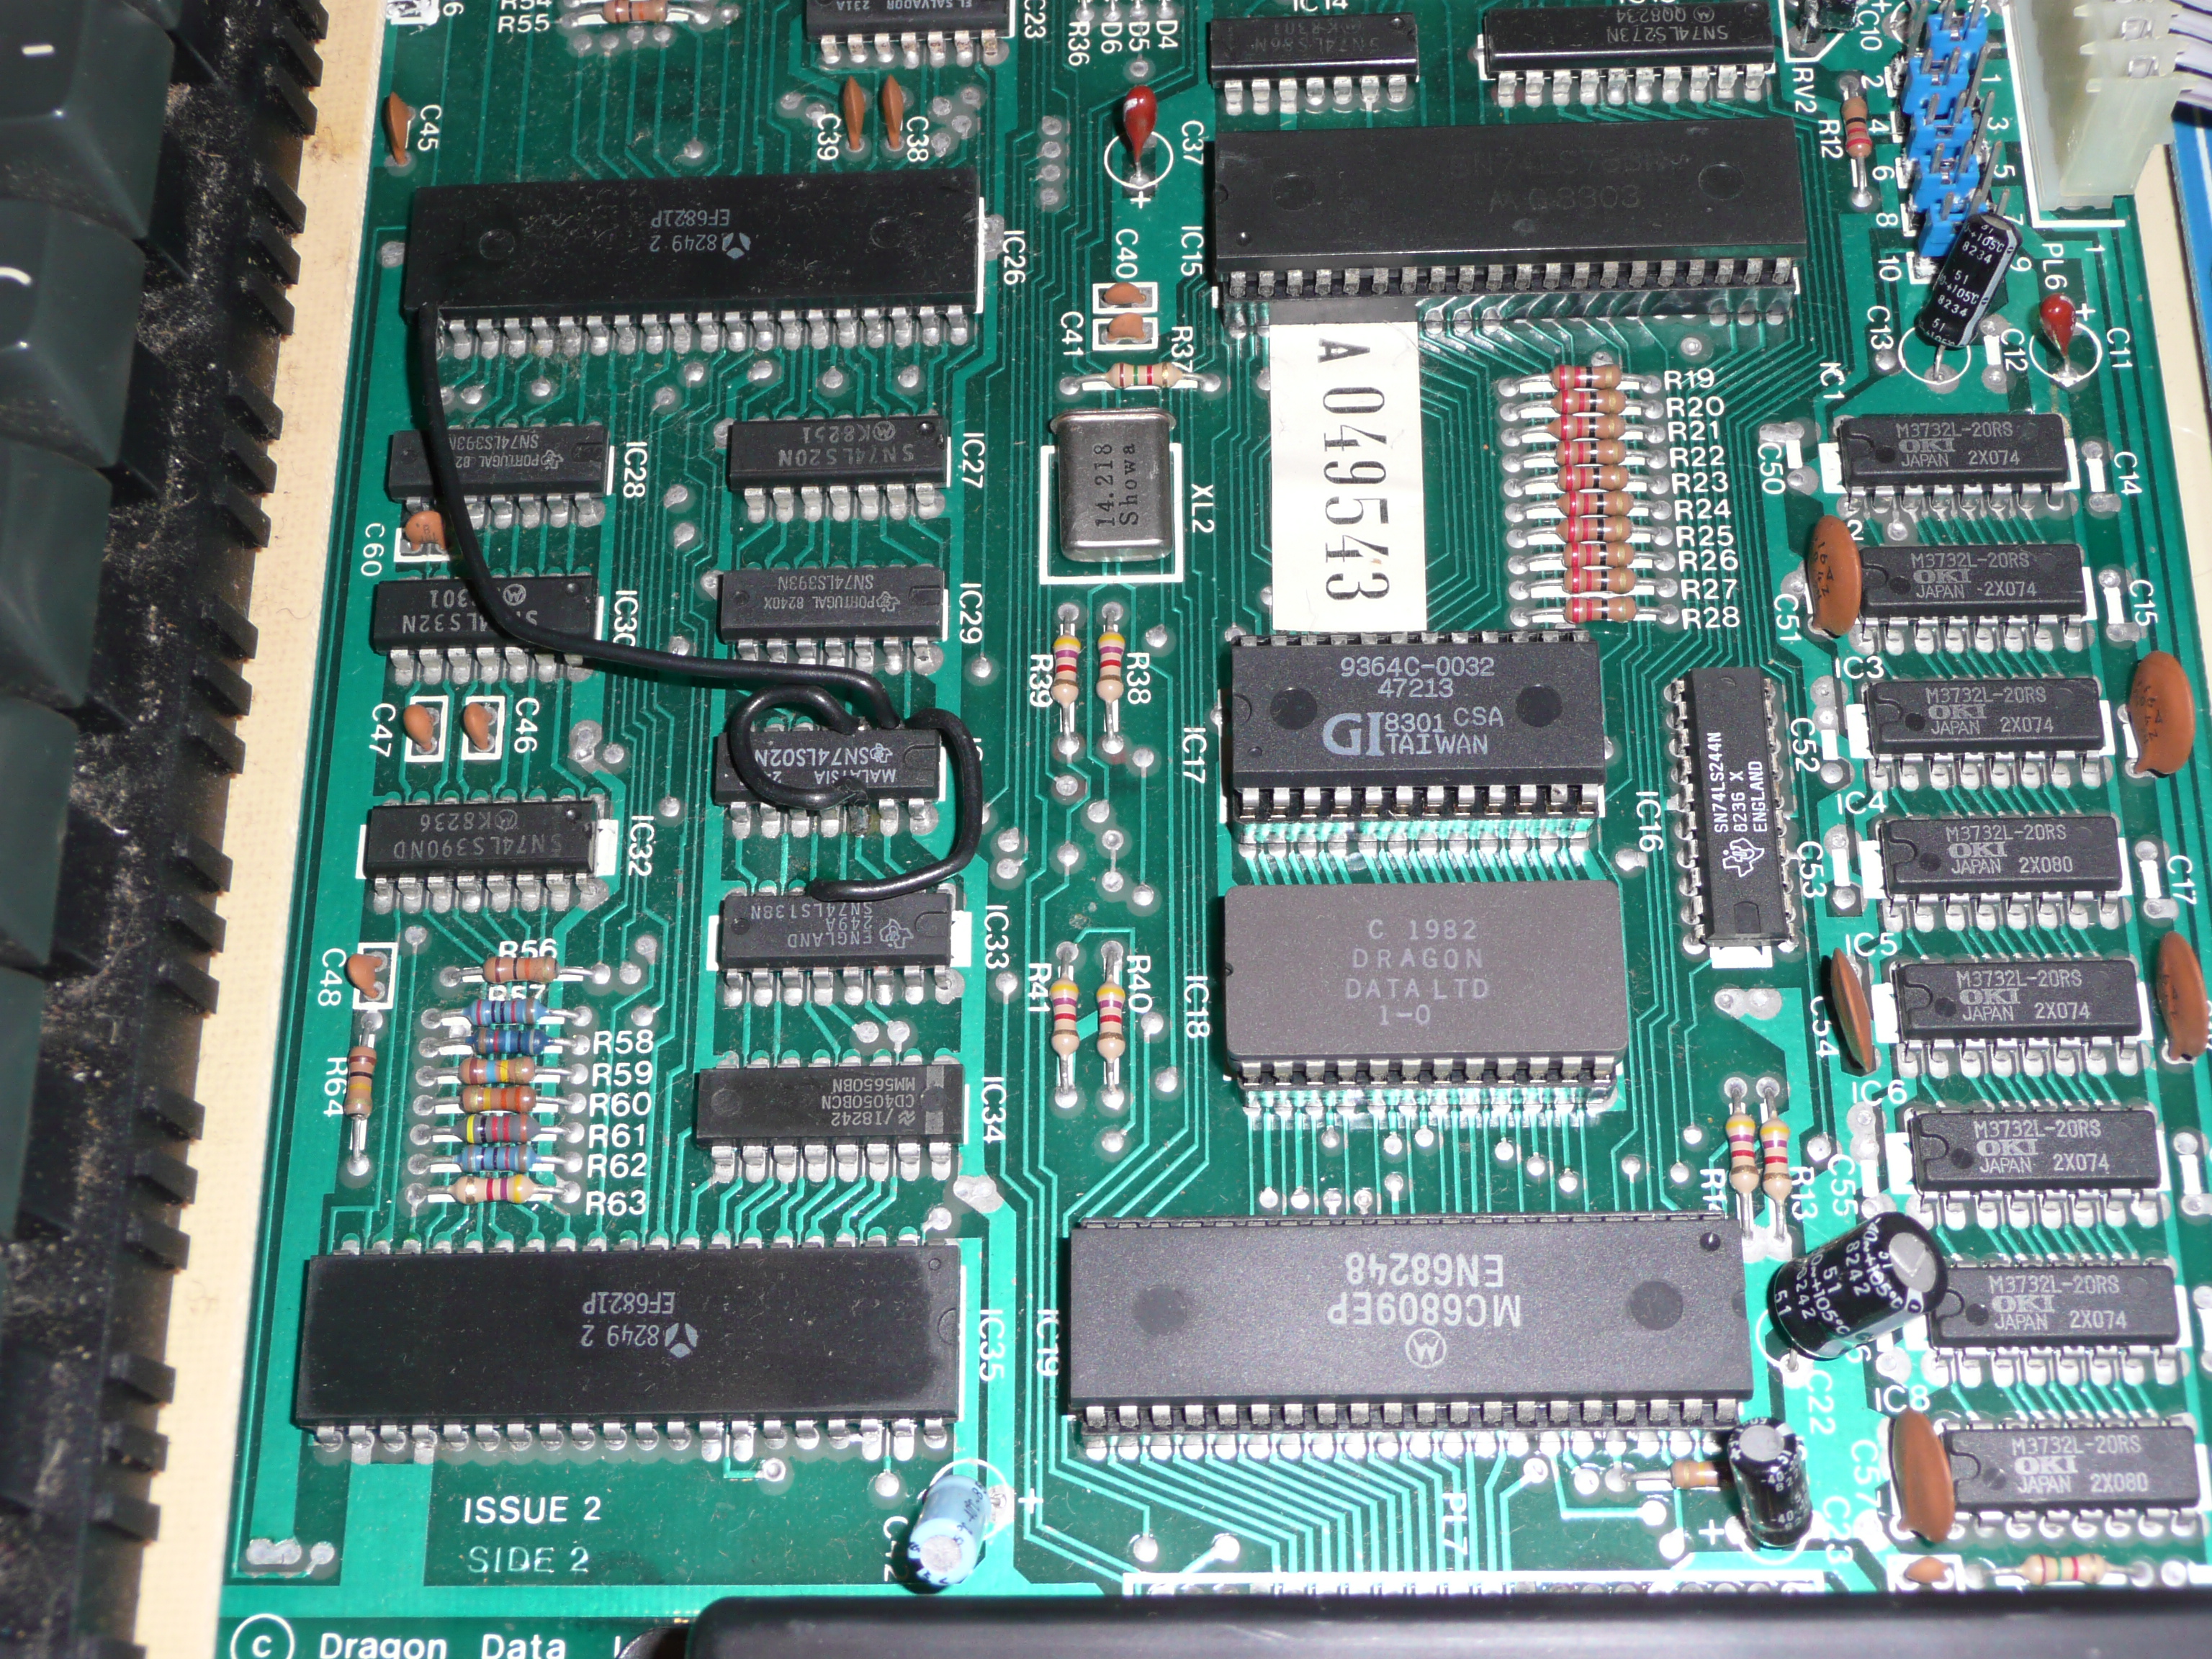 Dragon 32 modified to work with the inside 64k